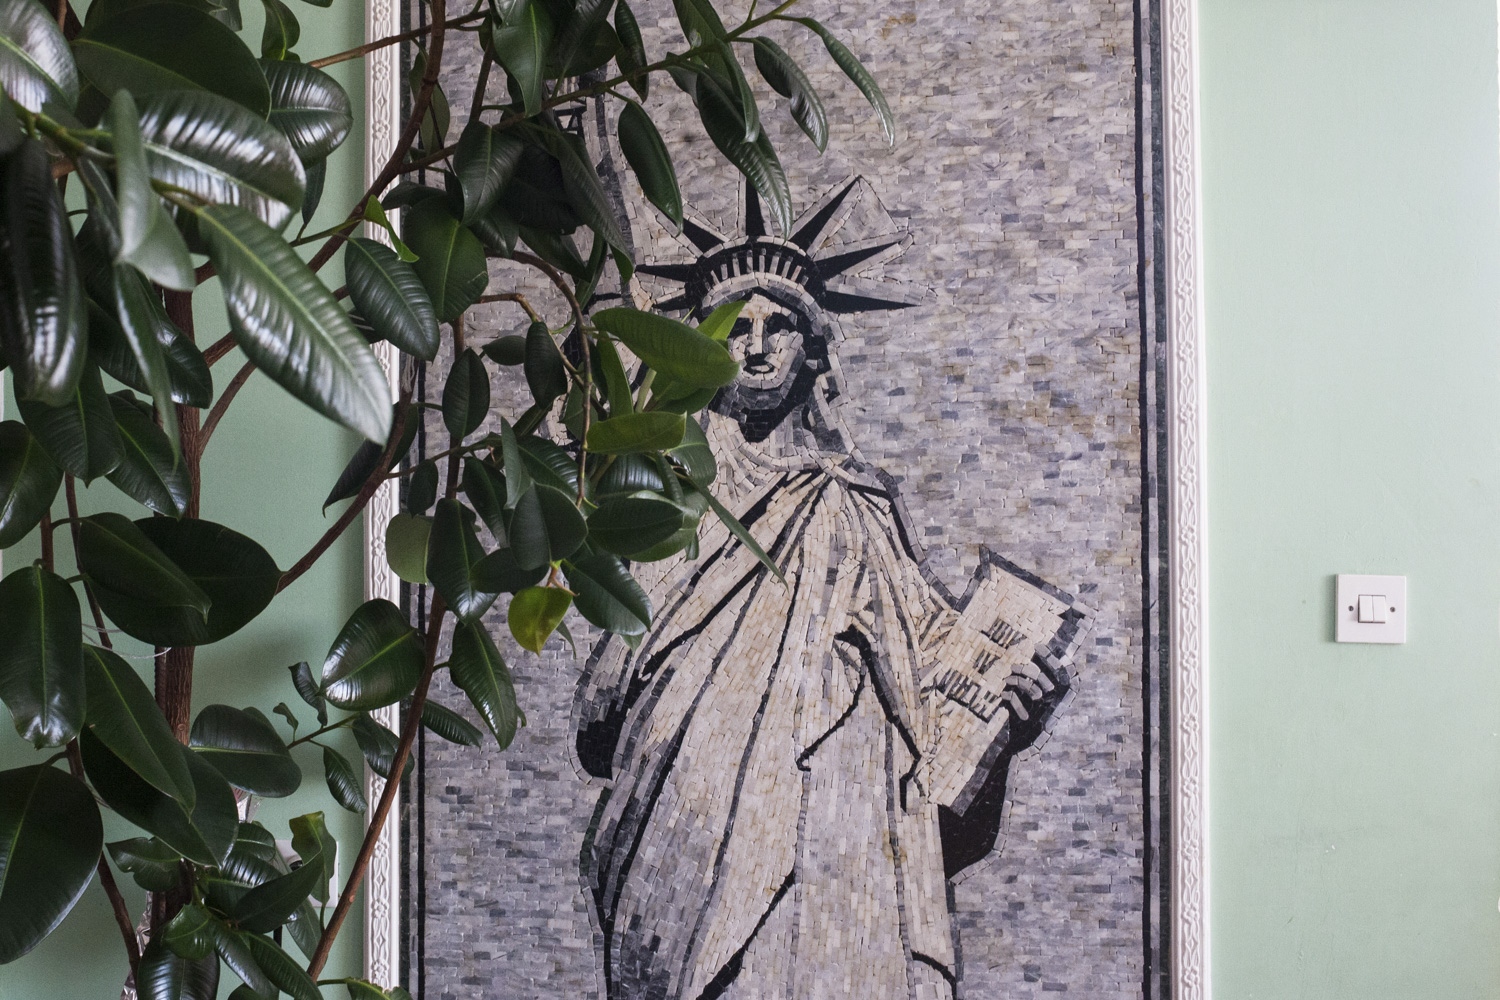 Mosaic of the Statue of Liberty in the living room of Ruzhdi KuÃ§i, known as â€œAmerikaniâ€, whose home, in Ferizaj, is completely decorated with motifs related to the United States. After the war, Ruzhdi has always tried to show his gratitude to the United States. â€œEven if I do not speak English, I feel American for adoption. I can never thank them enough for what that country has done for me,â€ he says.